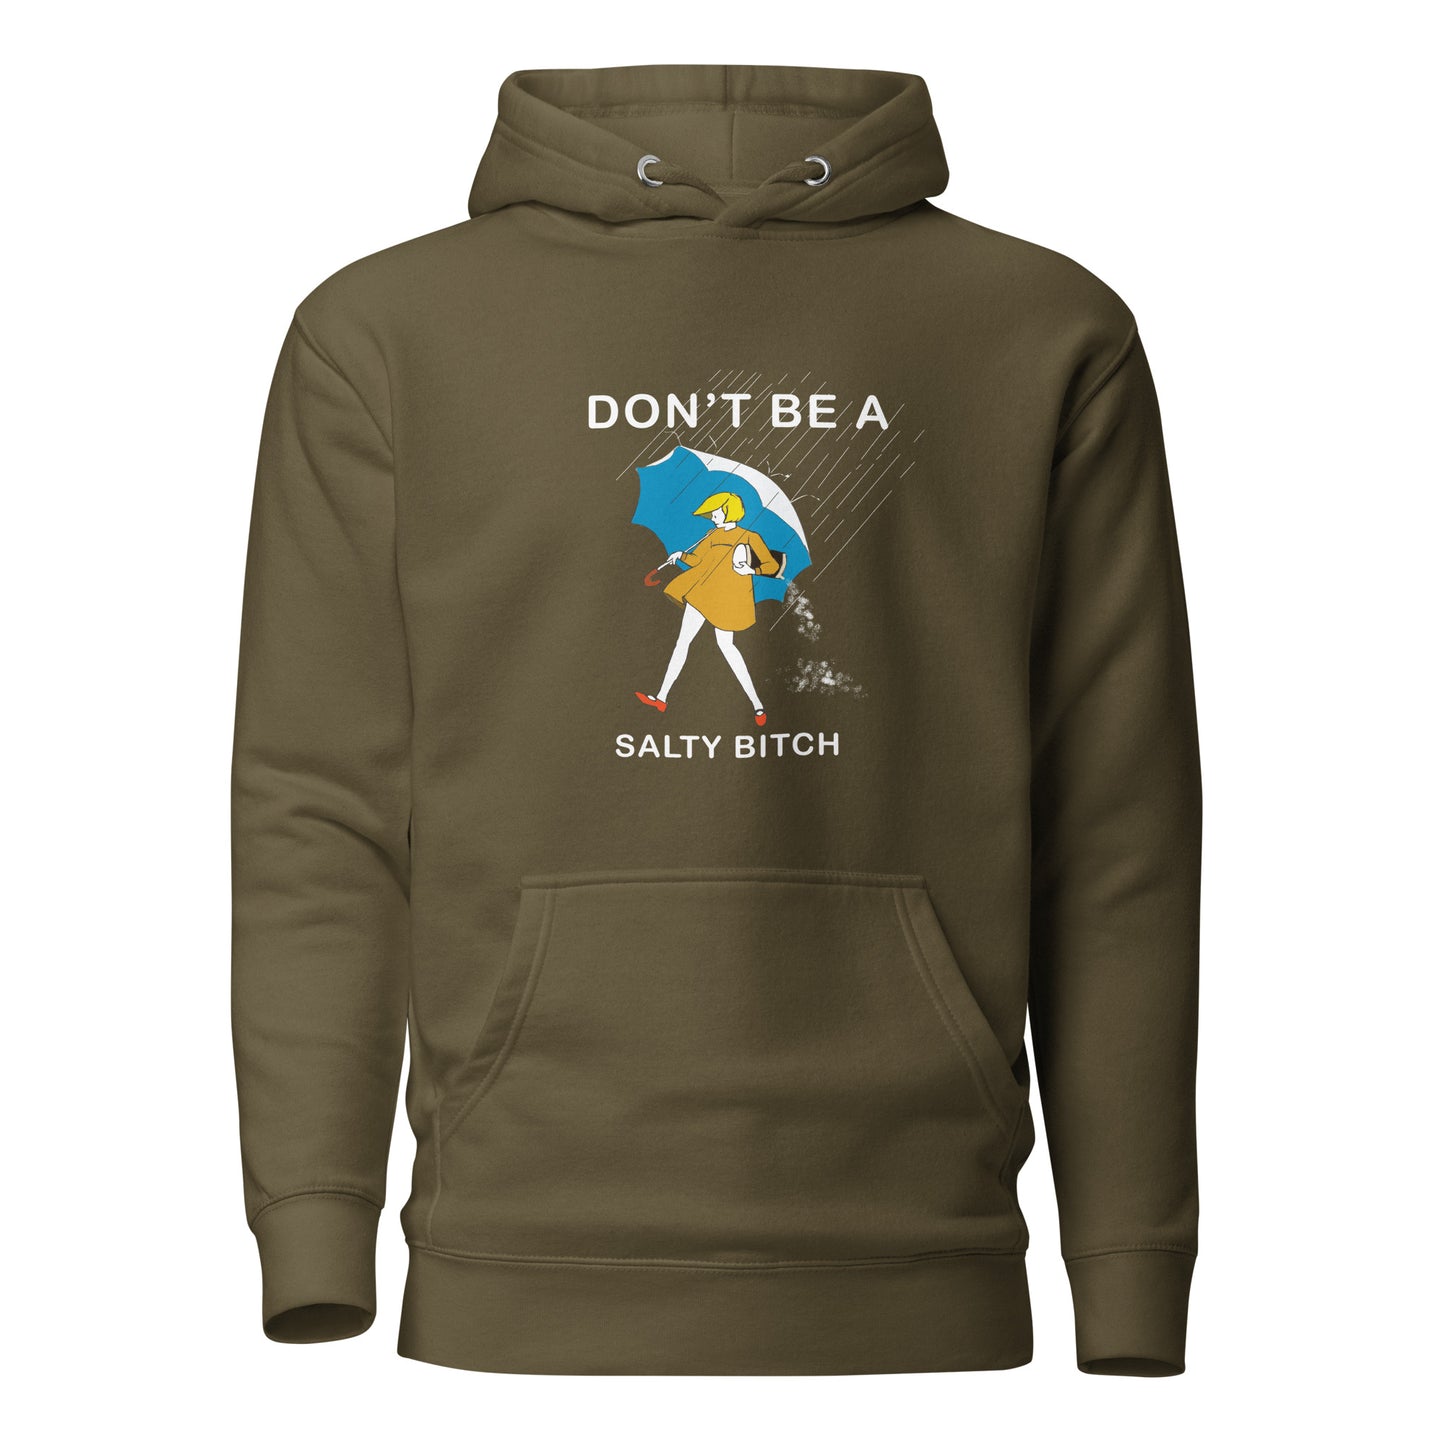 "Don't be" Hoodie